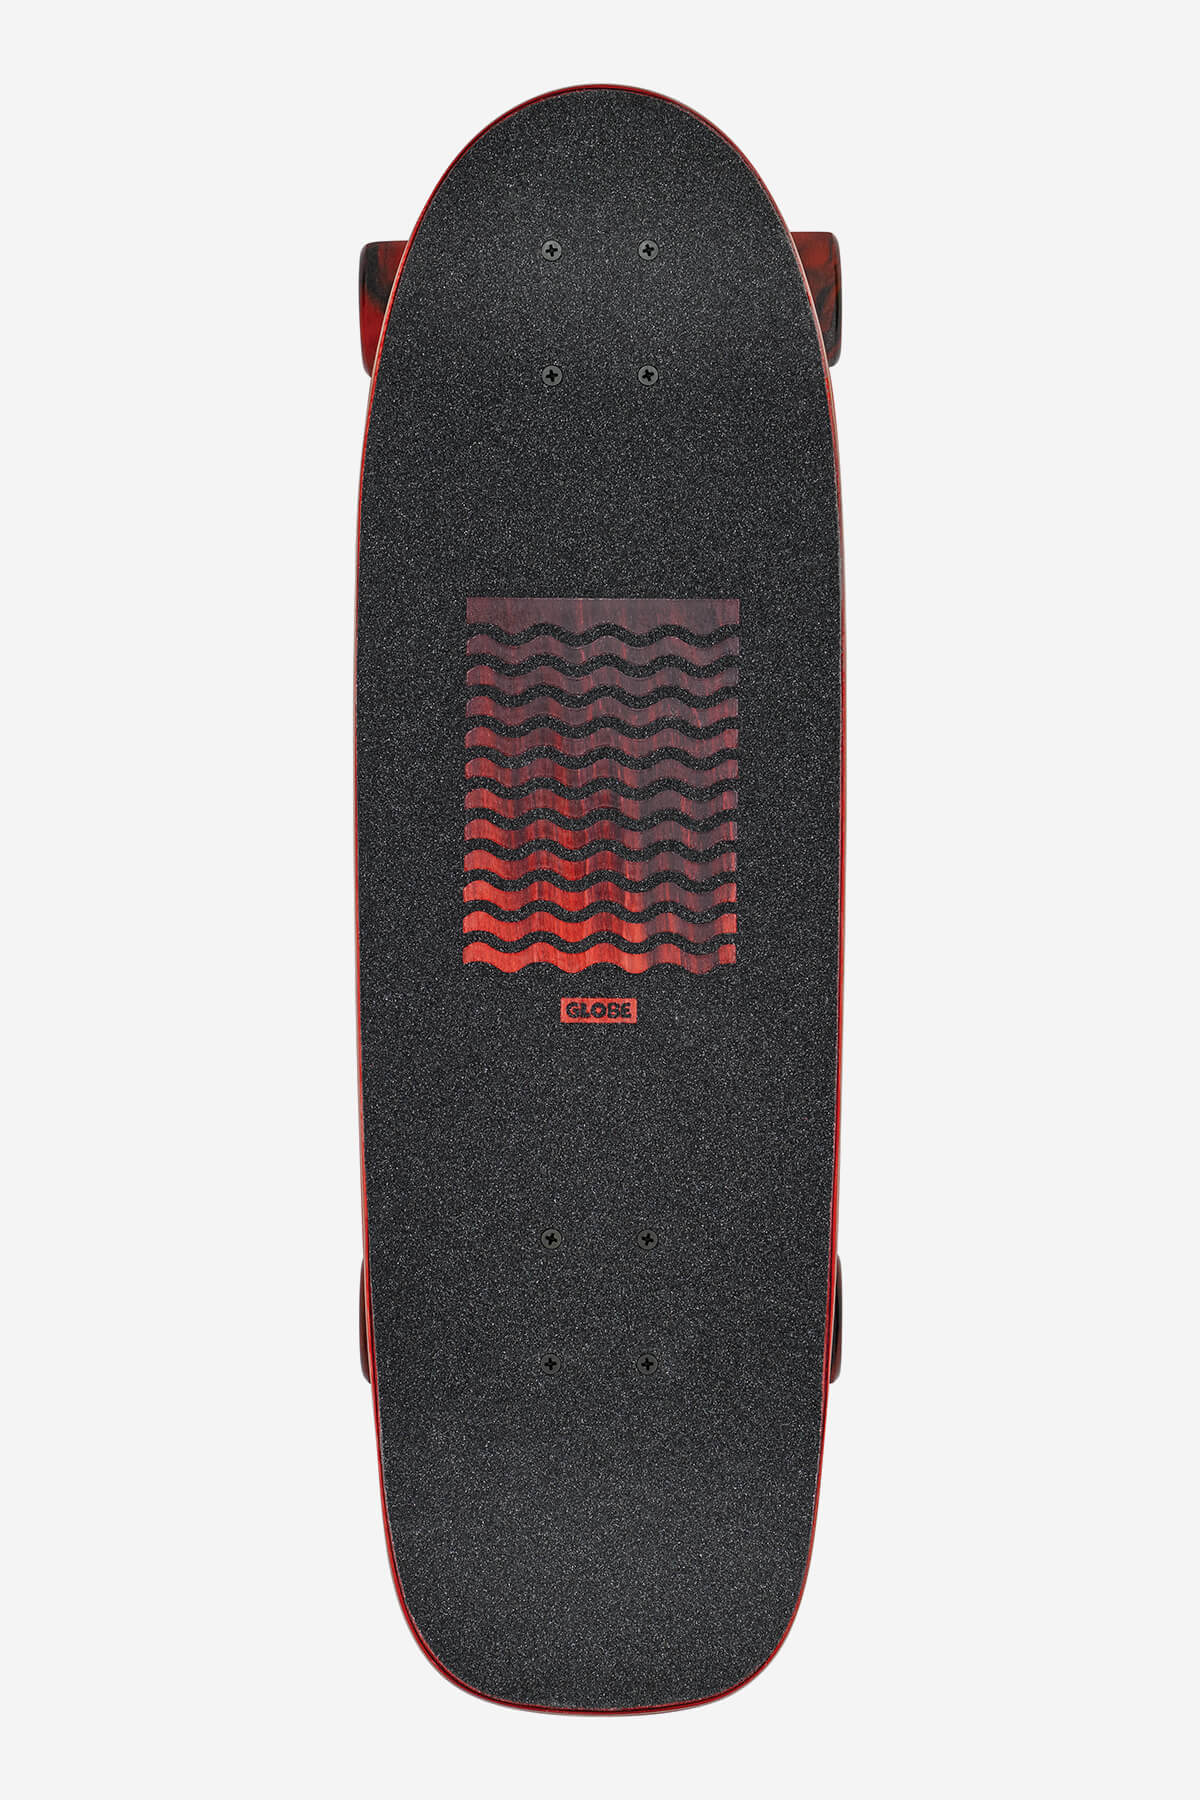 Globe Cruiserboards Outsider - 27" Cruiserboard in Hellbent/Red